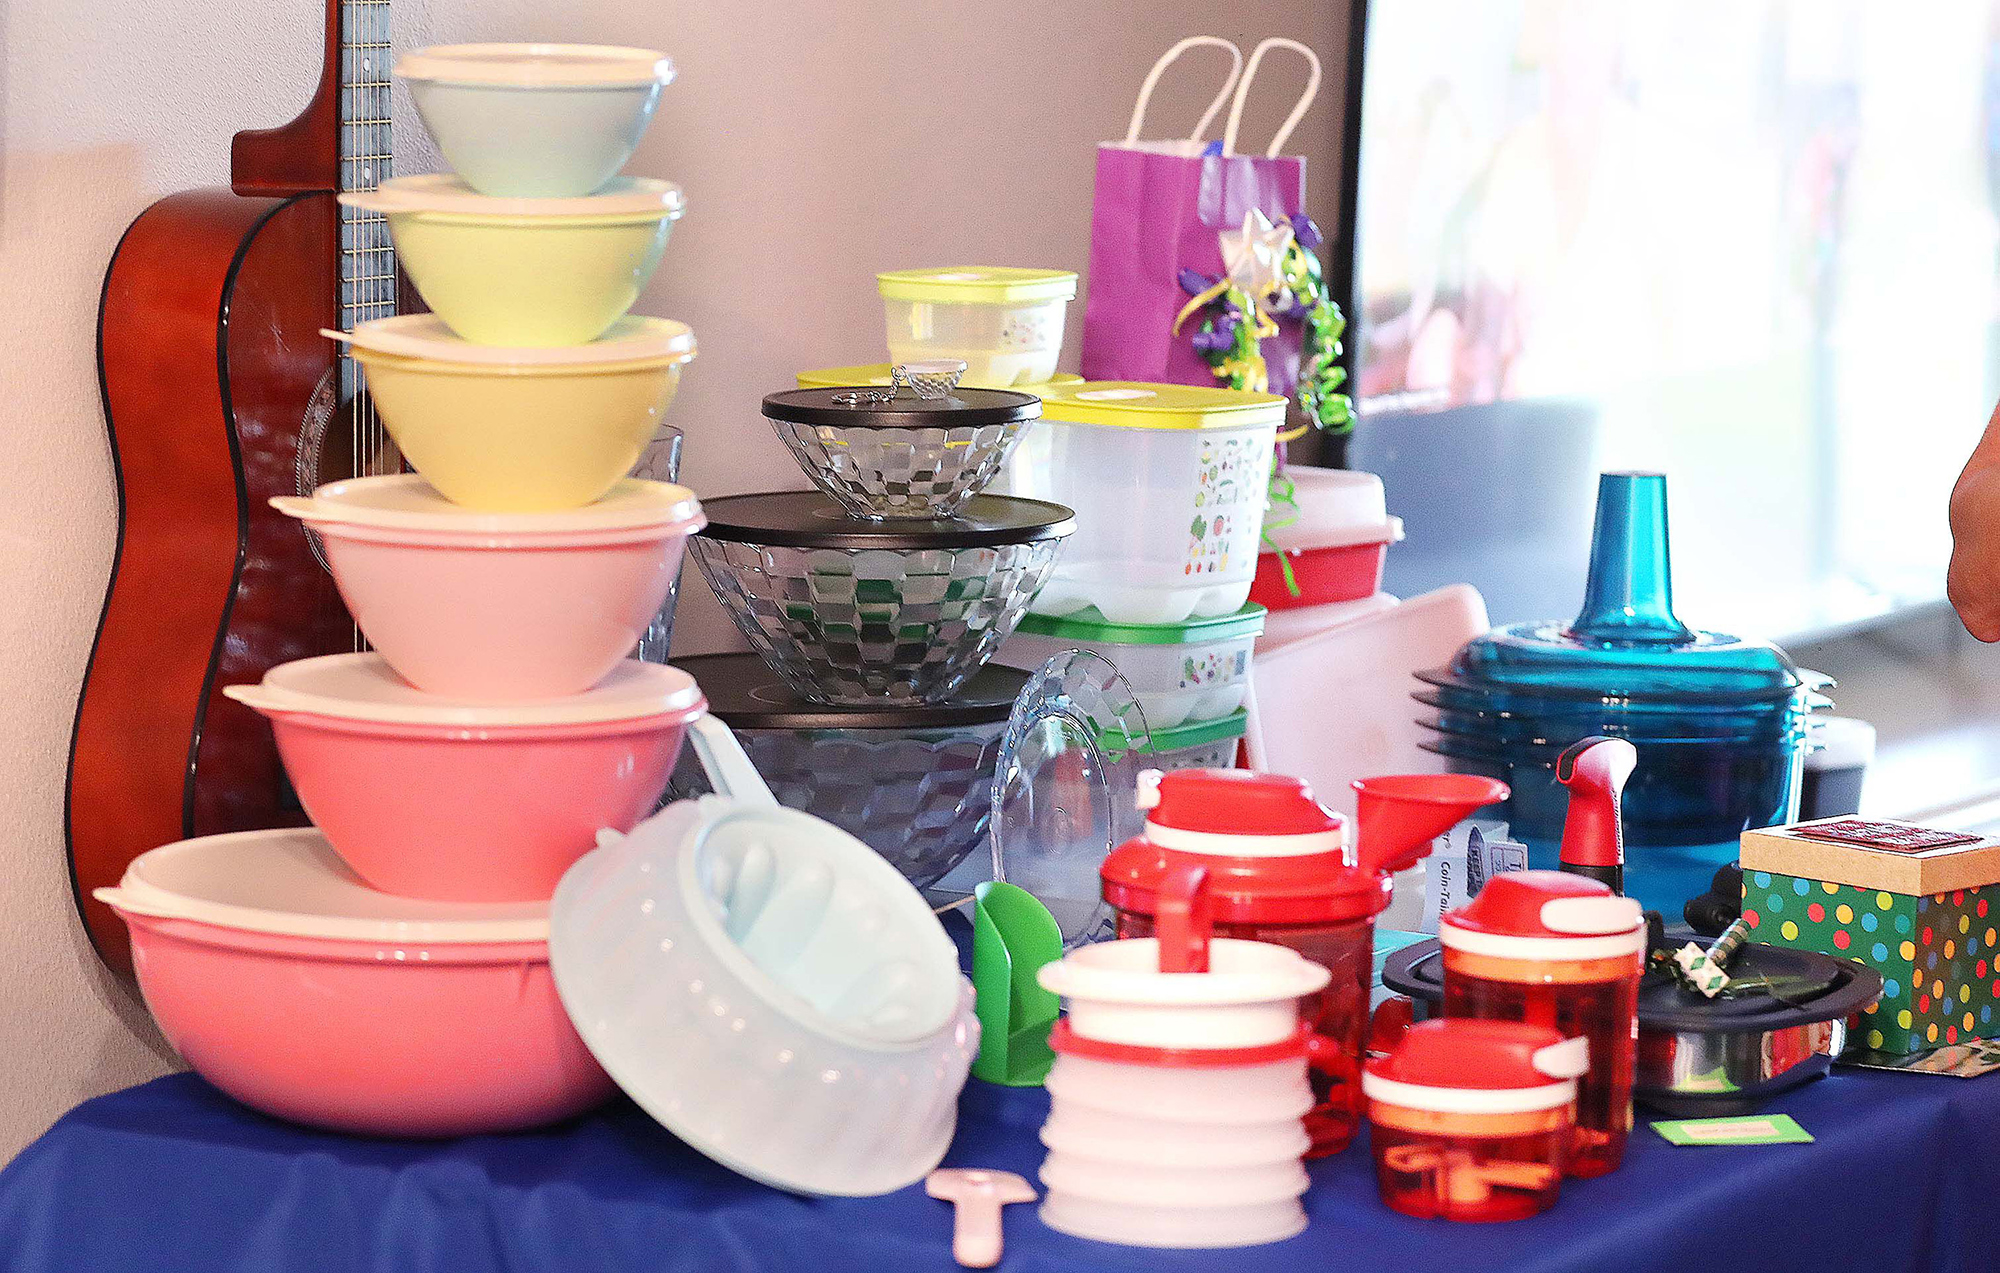 Tupperware items, including a set of "retro" storage containers at left, rest on a table ...